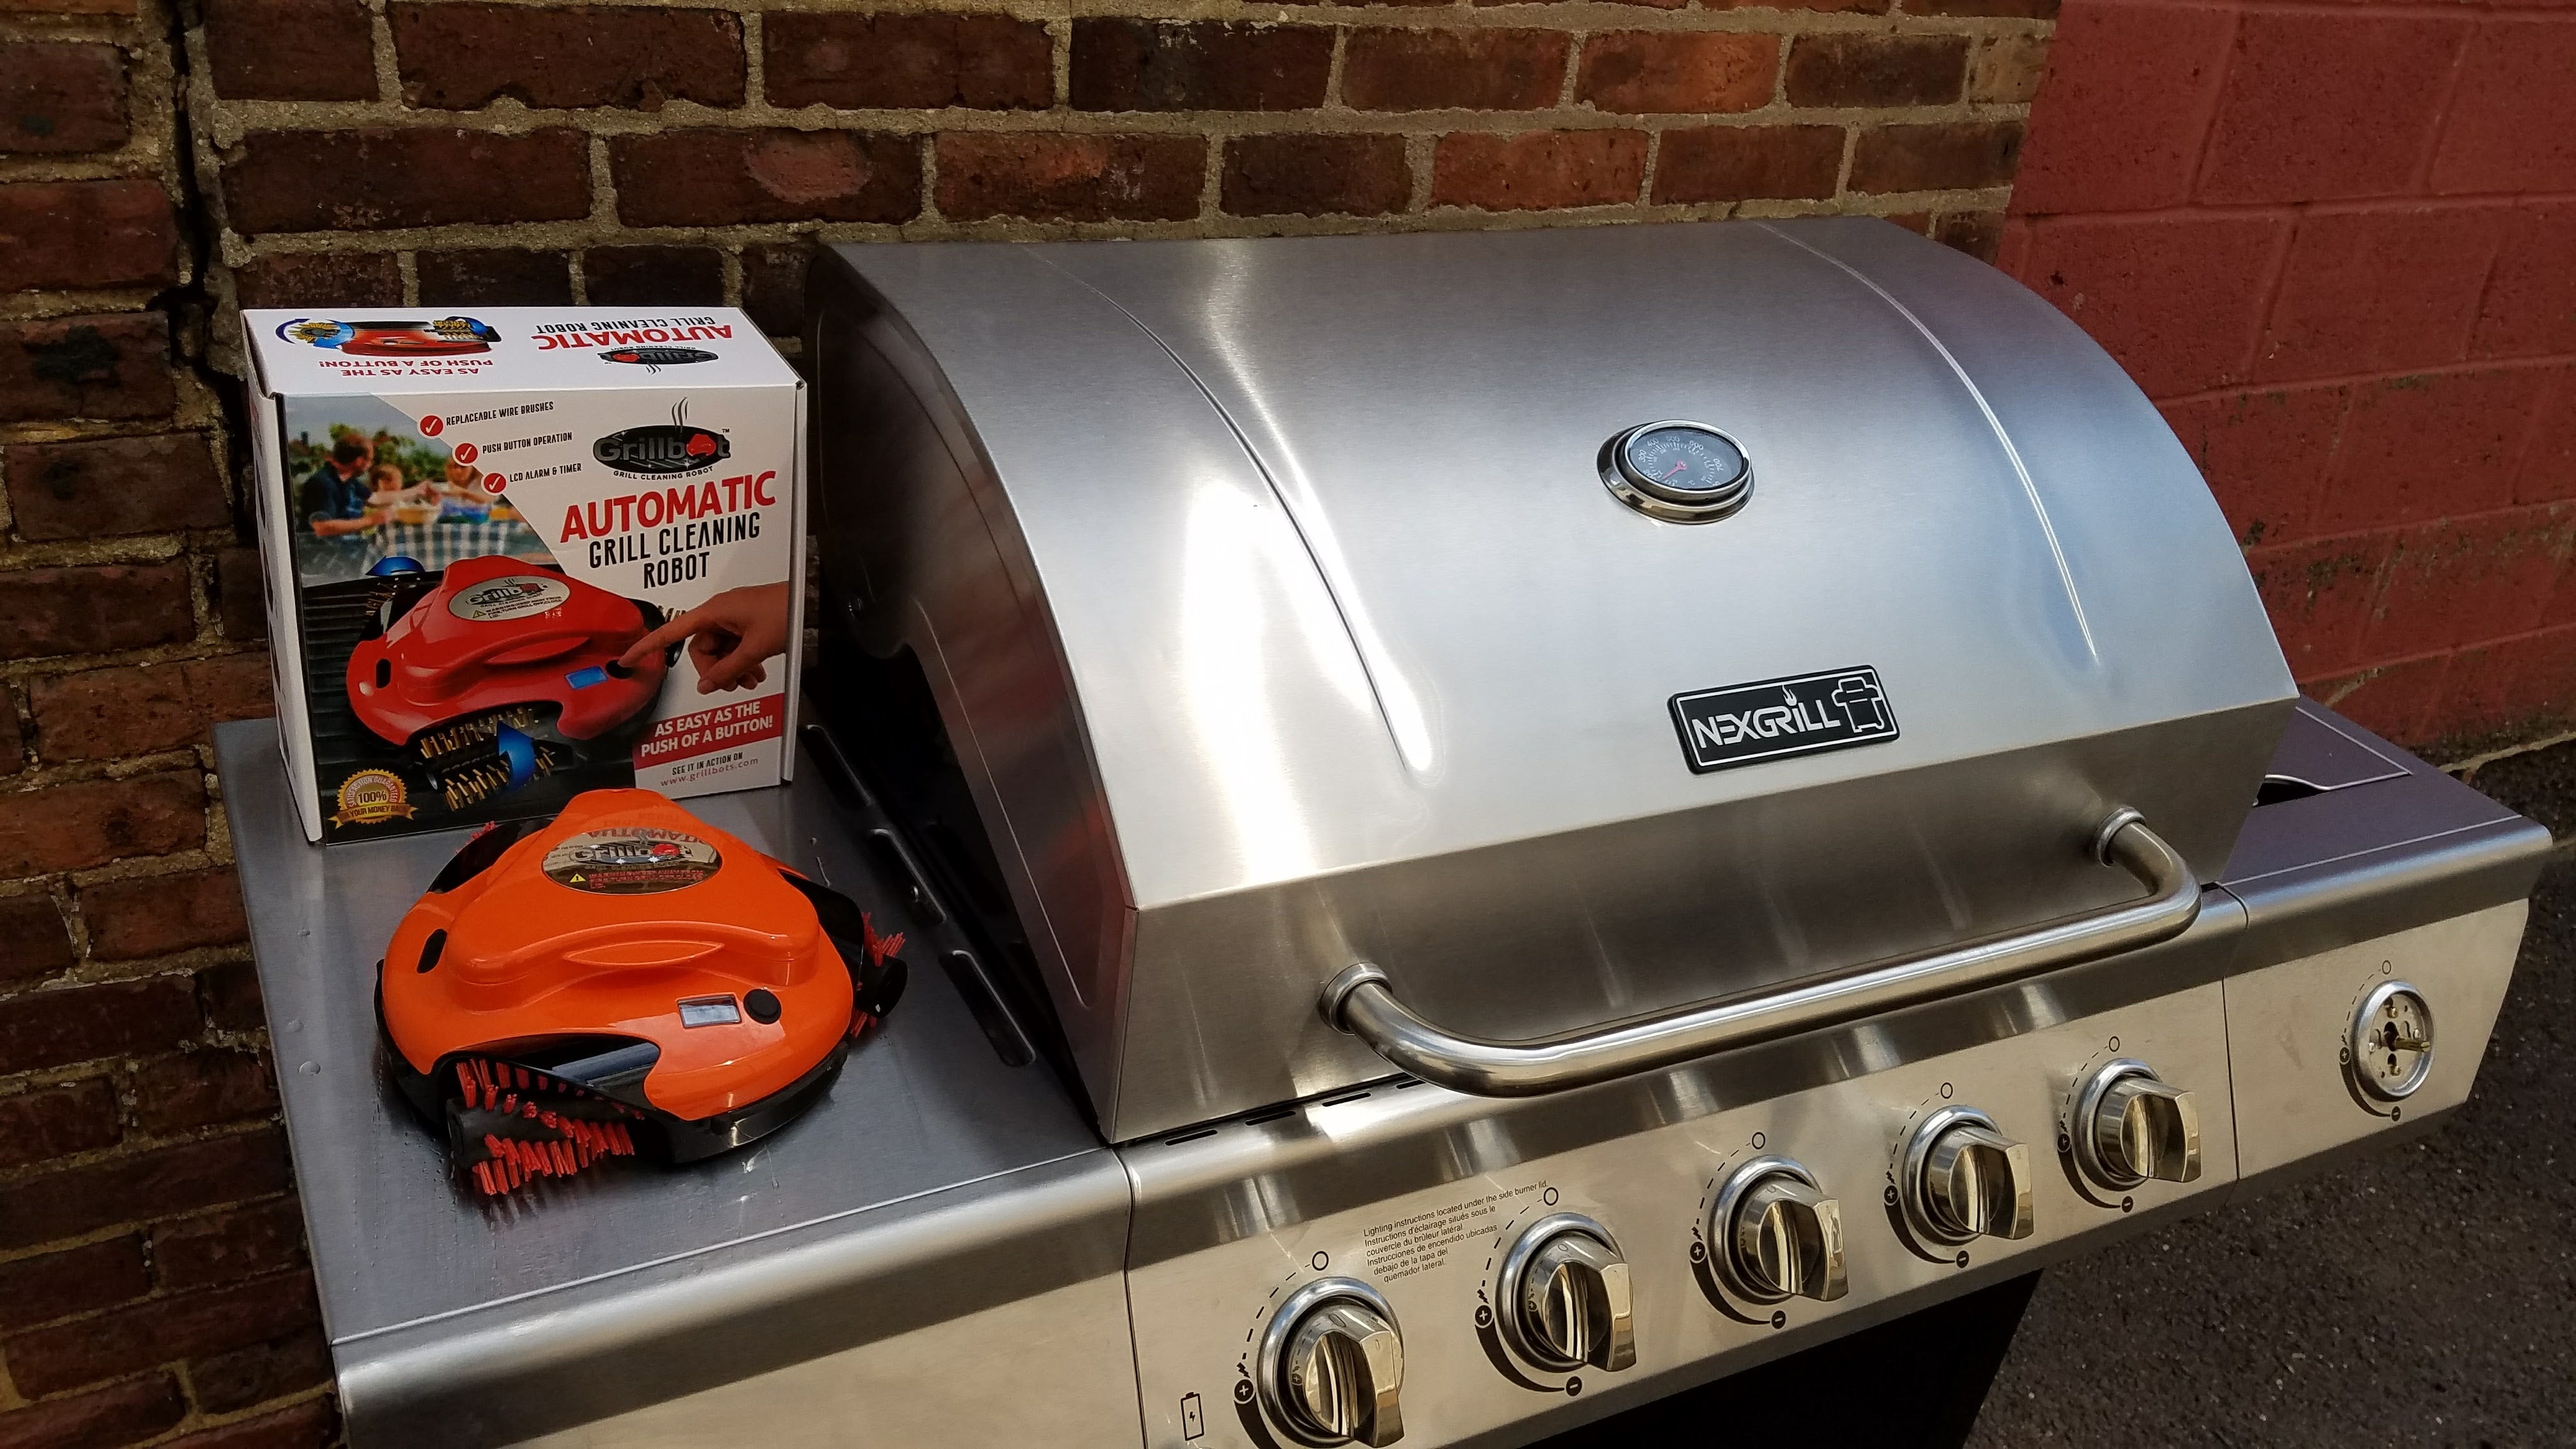 TechnaBob Reviews Grillbots, Grill Cleaning Robot